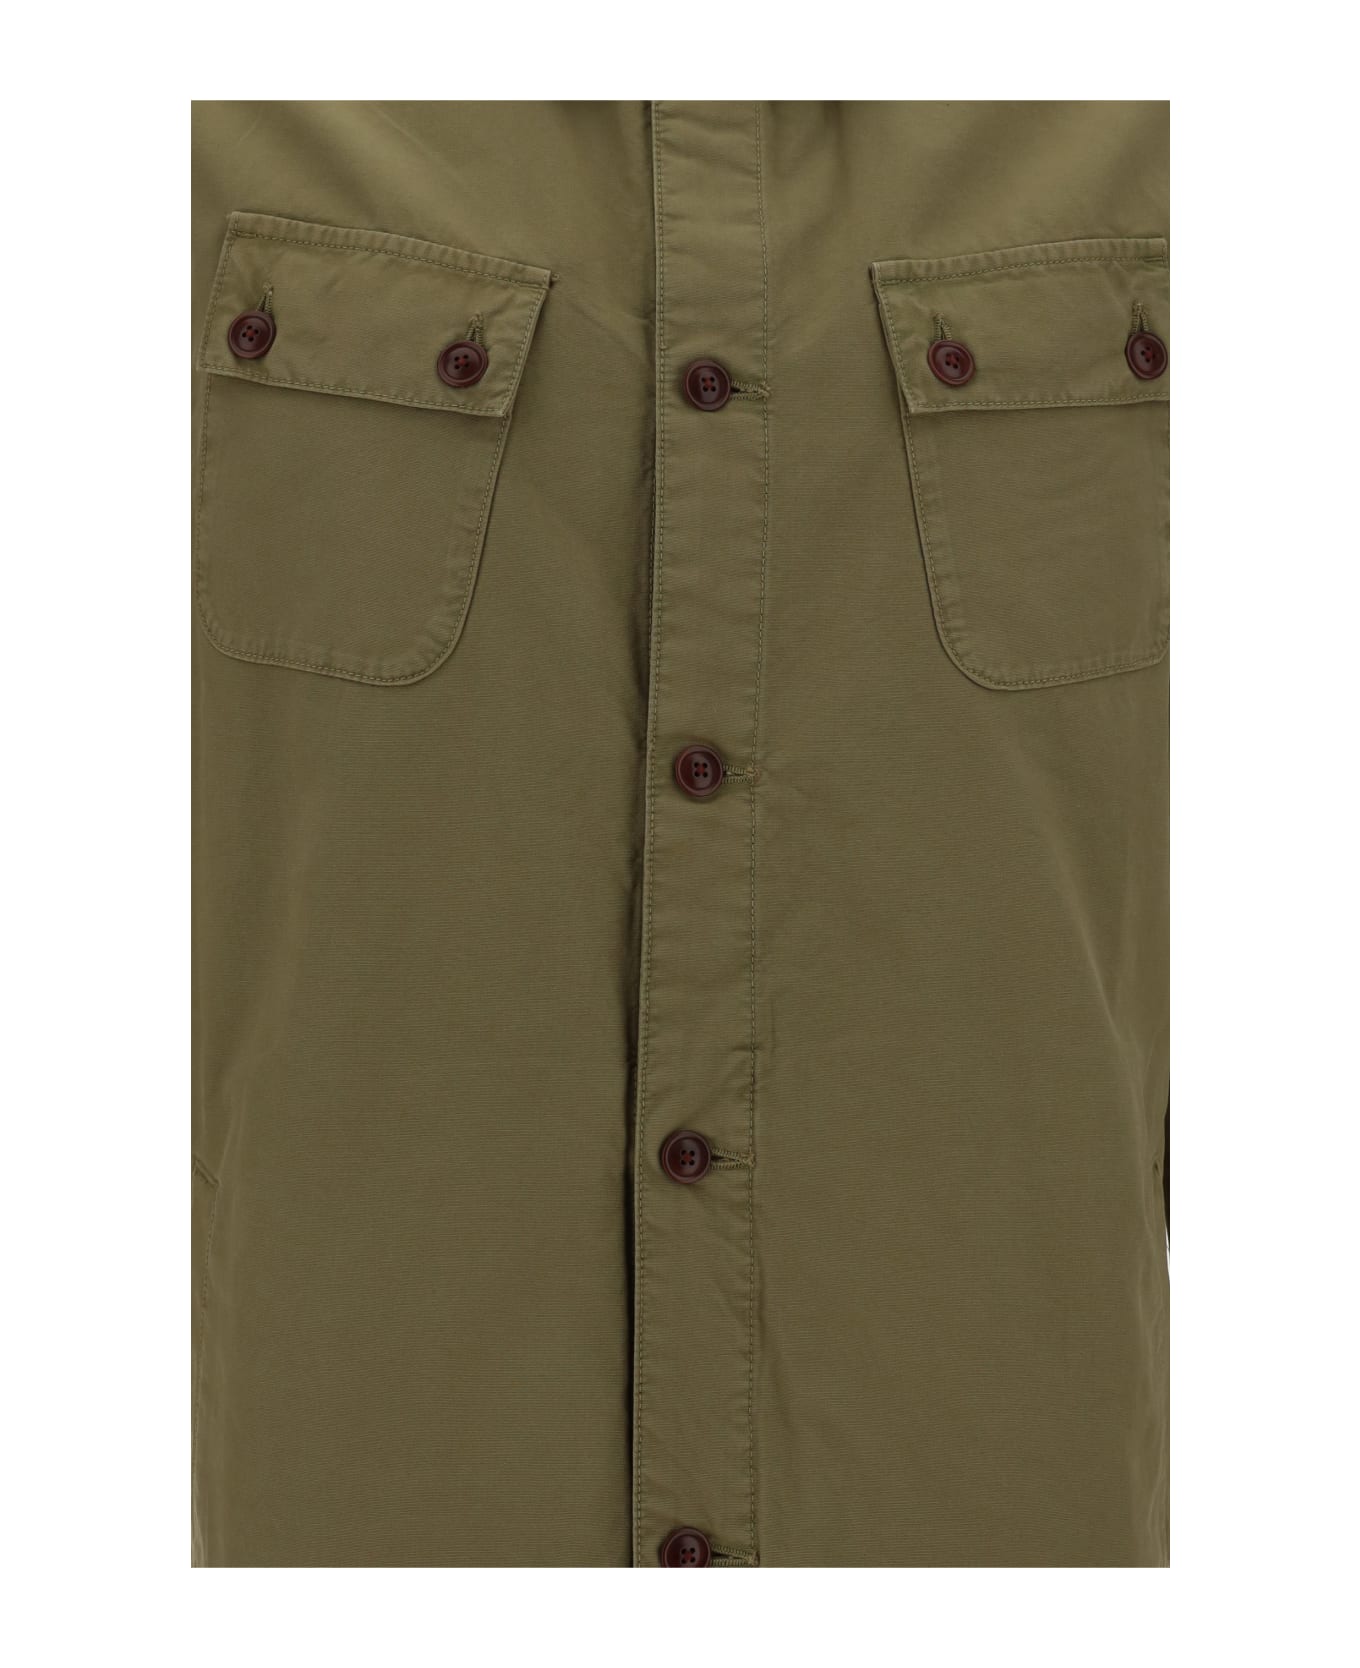 Barbour Harris Overshirt - Olive Branch